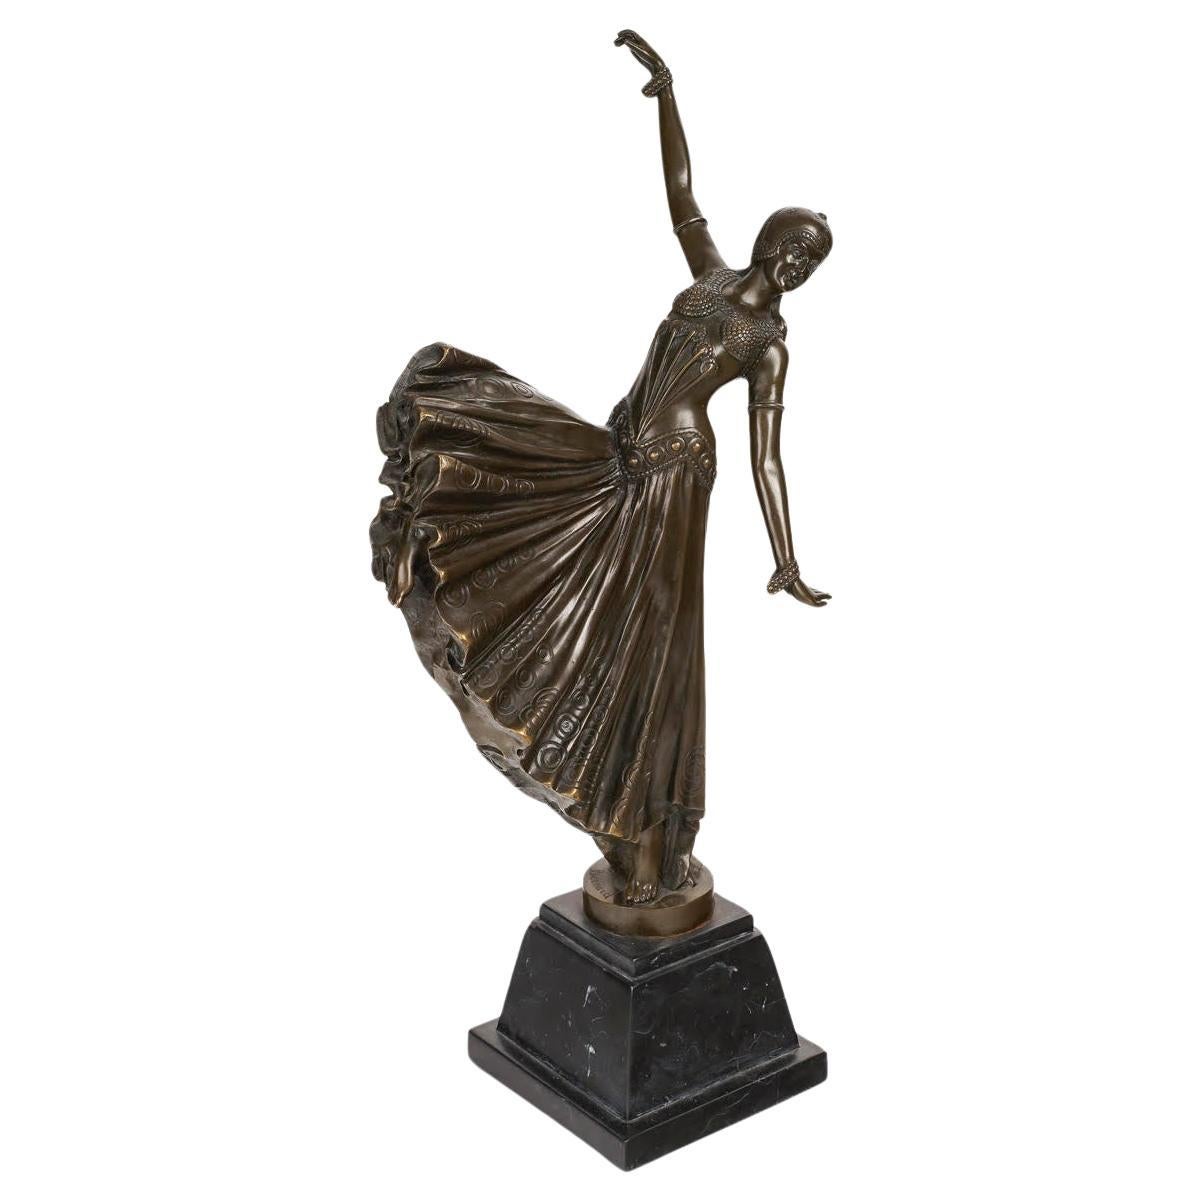 Sculpture of an Art Deco style Dancer in Bronze on a Marble Base, 20th Century.